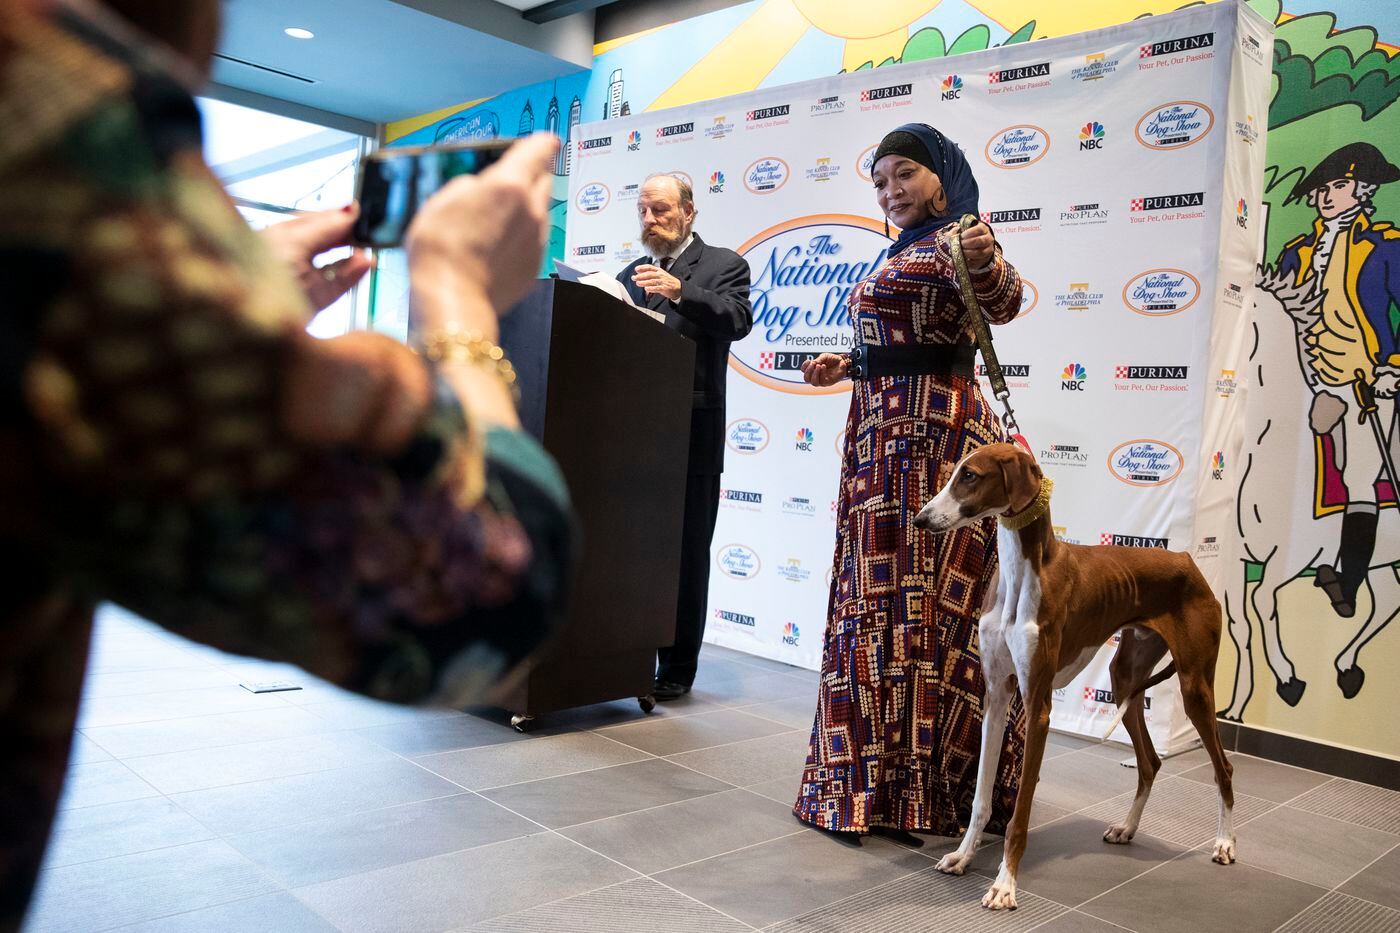 Aliya Taylor shows off Bahir, an Azawakh, as National Dog Show spokesman Steve Griffith speaks during a press event at the Tru Hotel by Hilton in Audobon for the Kennel Club of Philadelphia's National Dog Show.